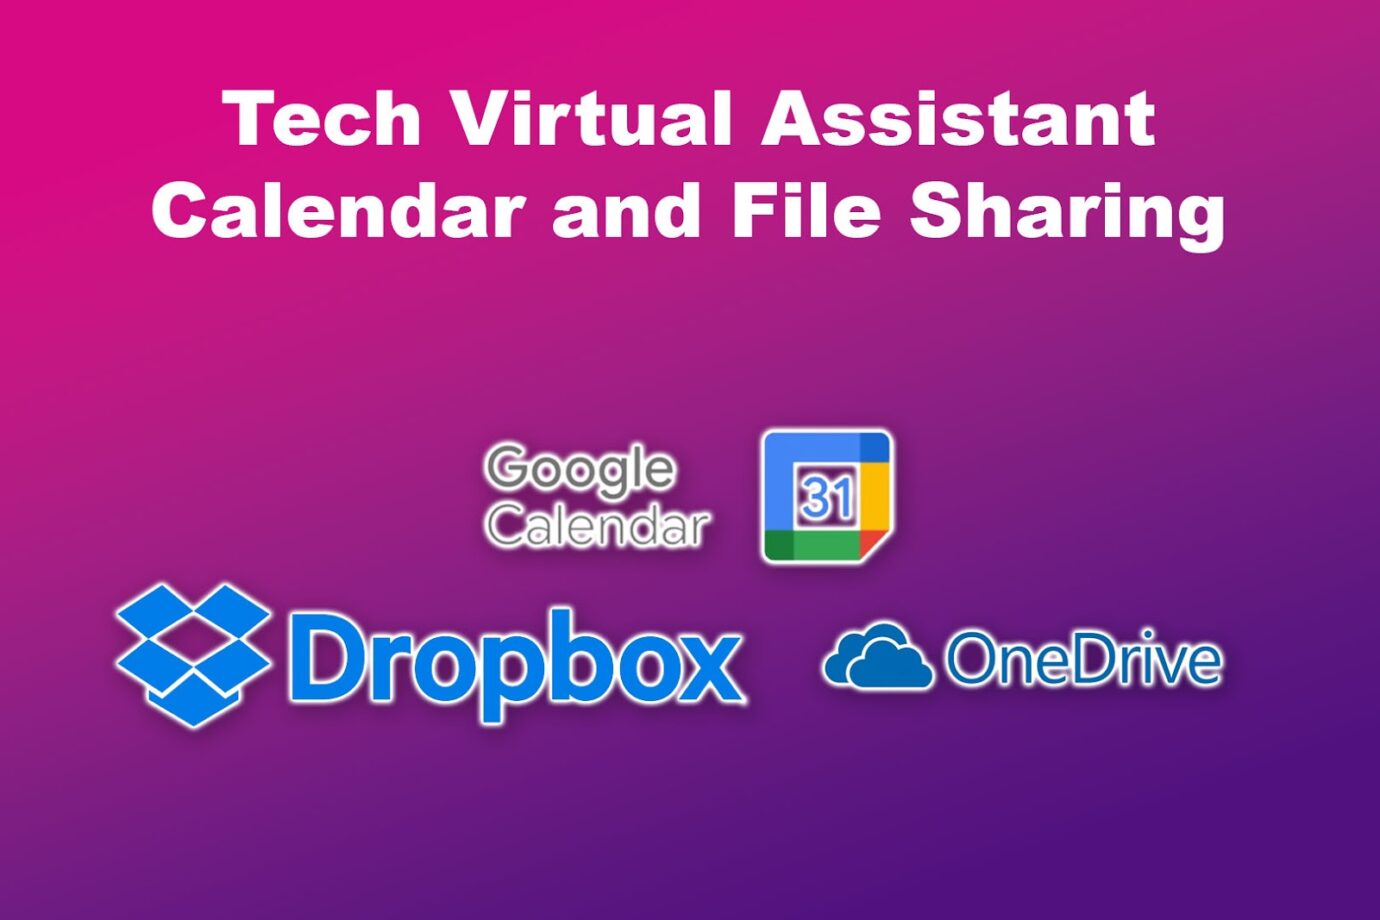 Tech Virtual Assistant Calendar and File Sharing